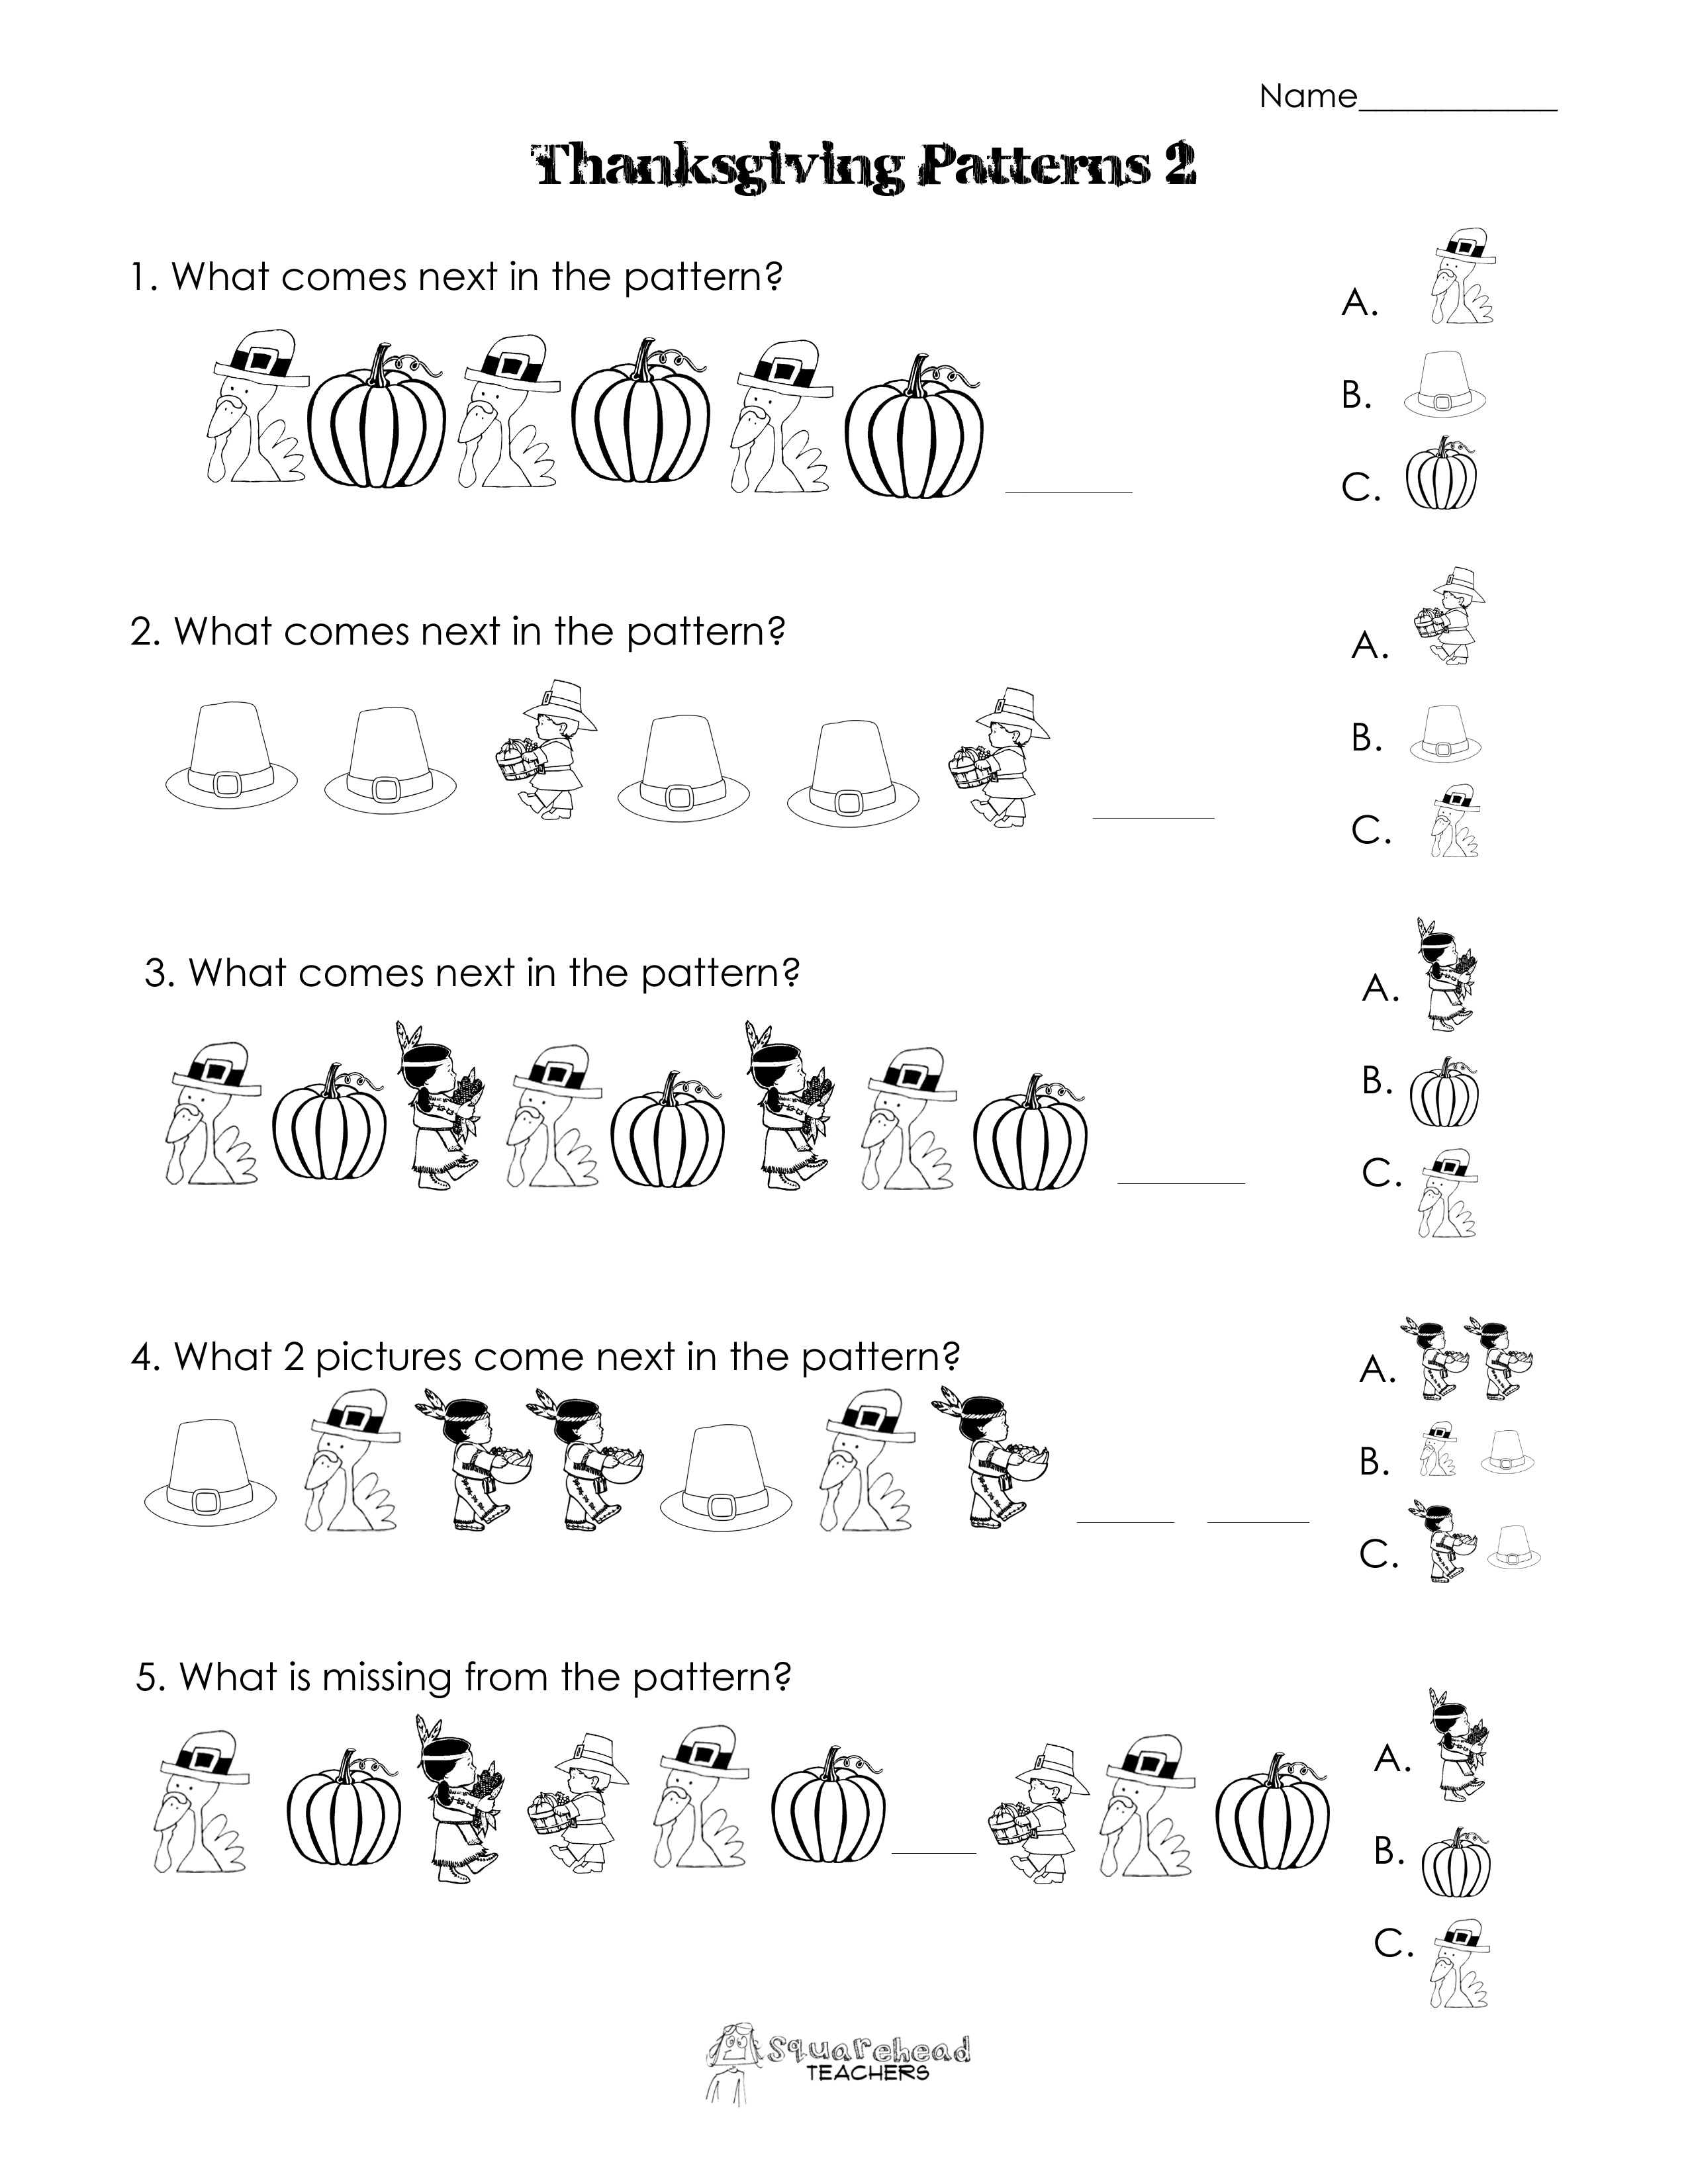 Another Thanksgiving Patterns Worksheet (K-2Nd) | Squarehead Teachers - Free Printable Thanksgiving Math Worksheets For 3Rd Grade